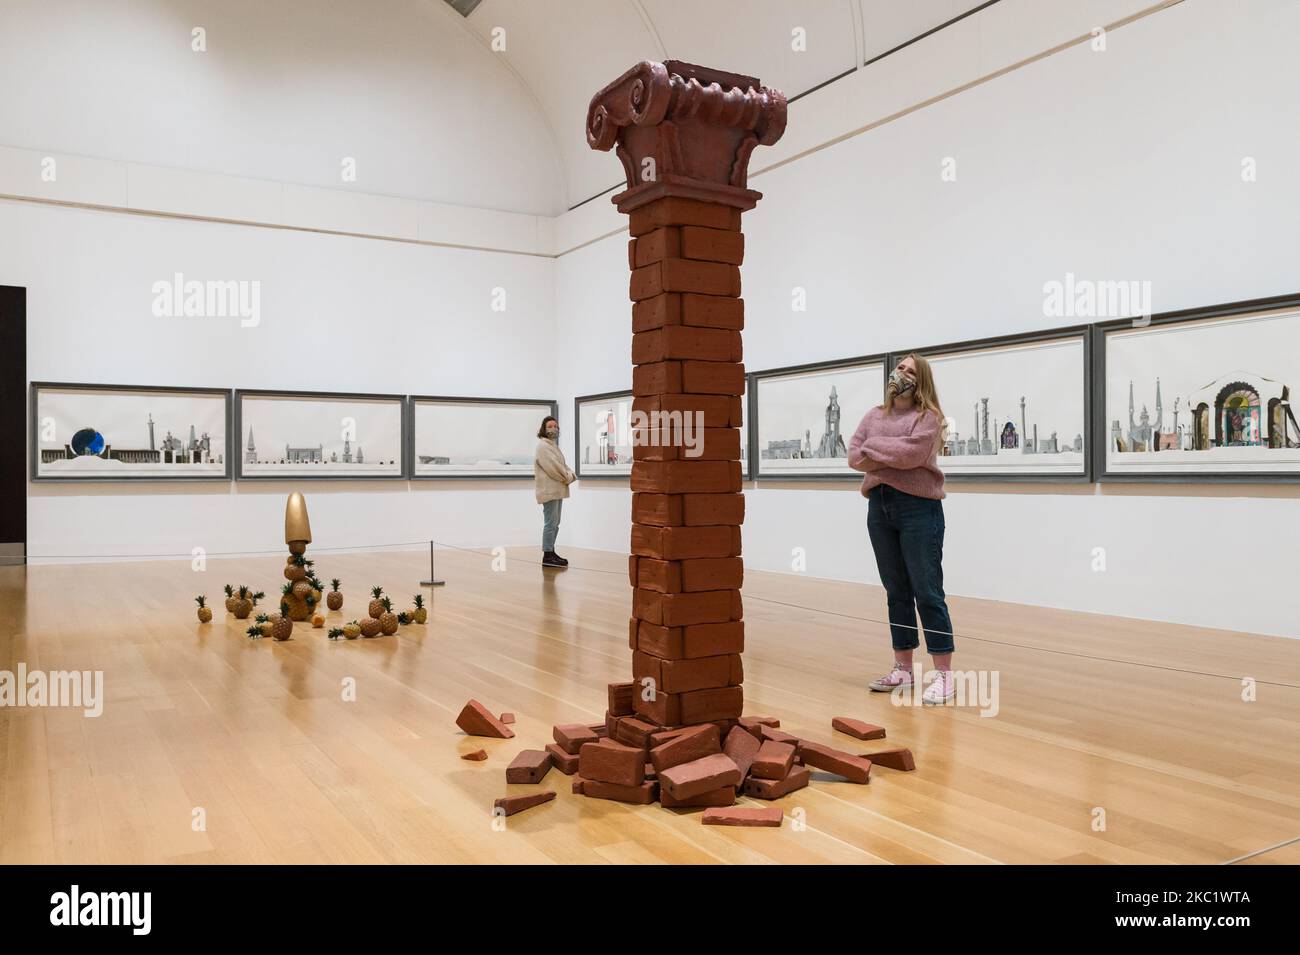 (EDITOR'S NOTE: Editorial Use Only)Gallery staff member looks at Unsupported Support (1987) and Architectural Fragment/ Third column (1986) by Edward Allington (1951-2017) with From the Birth of Paradise (1983) installation in the background during a photocall to promote opening of new displays at Tate Britain as part of the museum’s three collection routes designed to allow visitors to move around the gallery in a one way system due to coronavirus restrictions on 15 October 2020 in London, England. (Photo by WIktor Szymanowicz/NurPhoto) Stock Photo